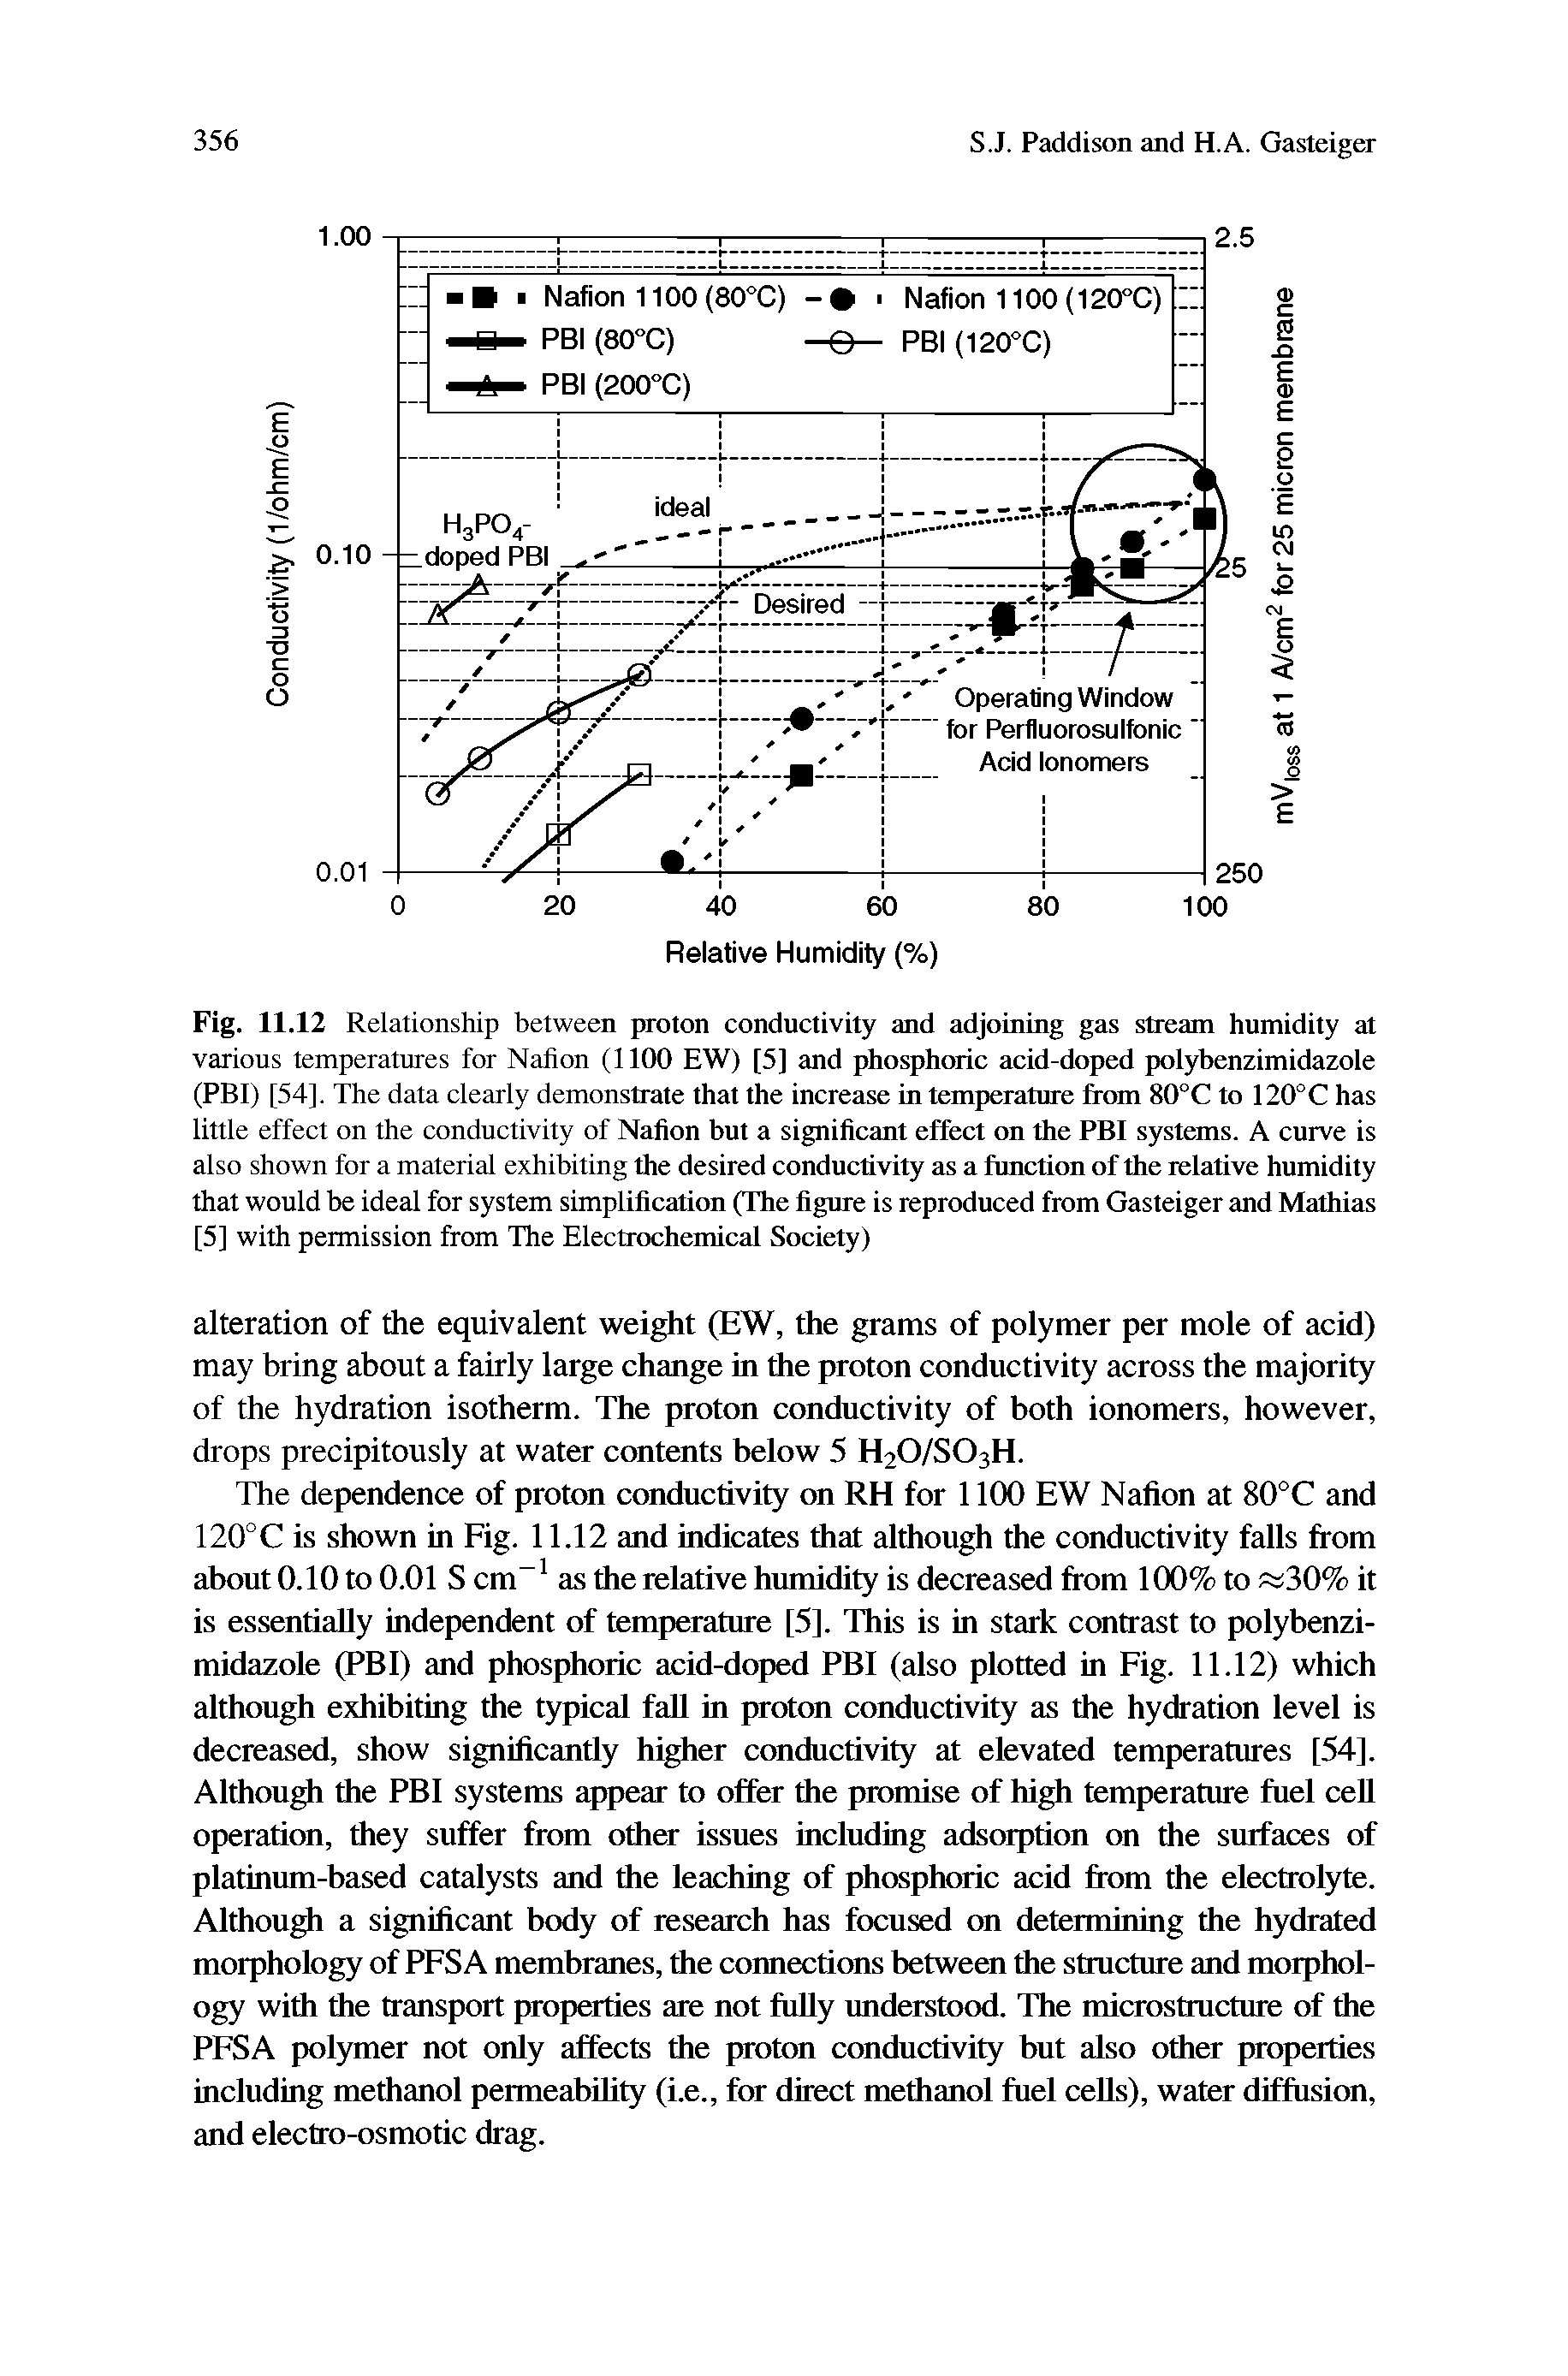 Fig. 11.12 Relationship between proton conductivity and adjoining gas stream humidity at various temperatures for Nafion (1100 EW) [5] and phosphoric acid-doped polybenzimidazole (FBI) [54]. The data clearly demonstrate that the increase in temperature from 80°C to 120°C has little effect on the conductivity of Nafion but a significant effect on the PBI systeans. A curve is also shown for a material exhibiting the desired conductivity as a function of the relative humidity that would be ideal for system simpUiication (The figure is reproduced from Gasteiger and Mathias [5] with permission from The Electrochemical Society)...